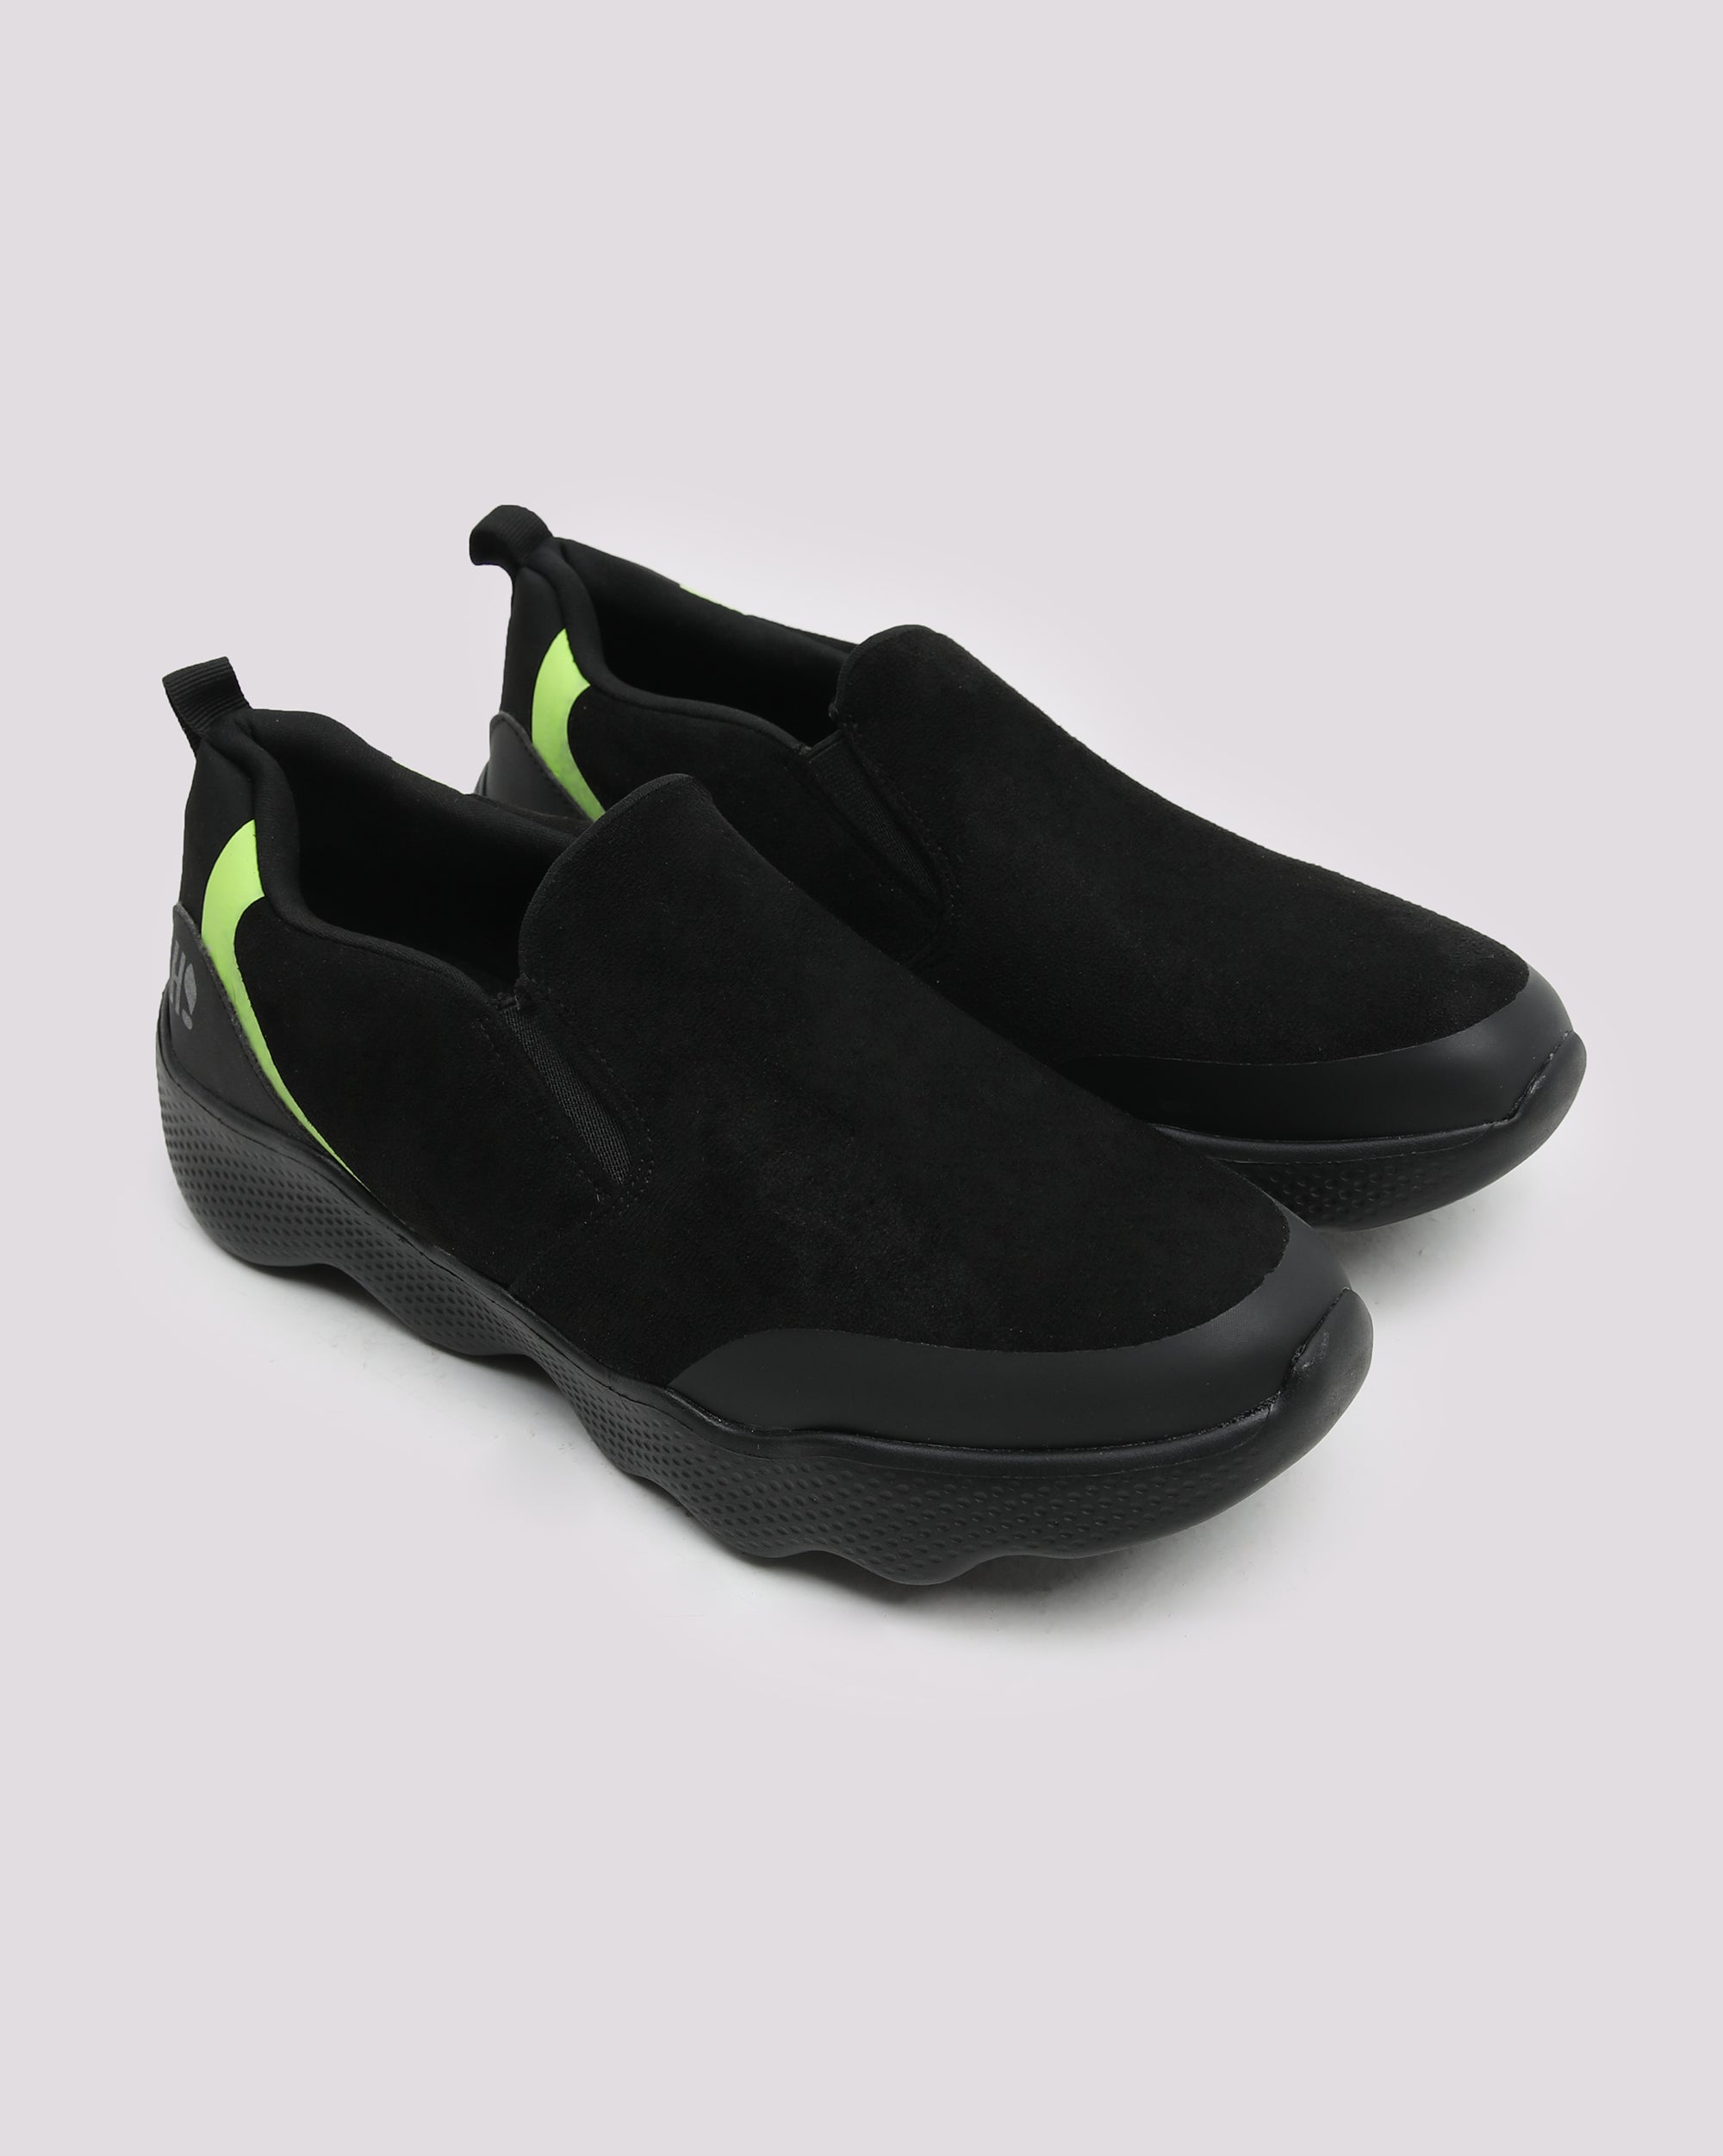 Light Weight Wavy Sole Shoes